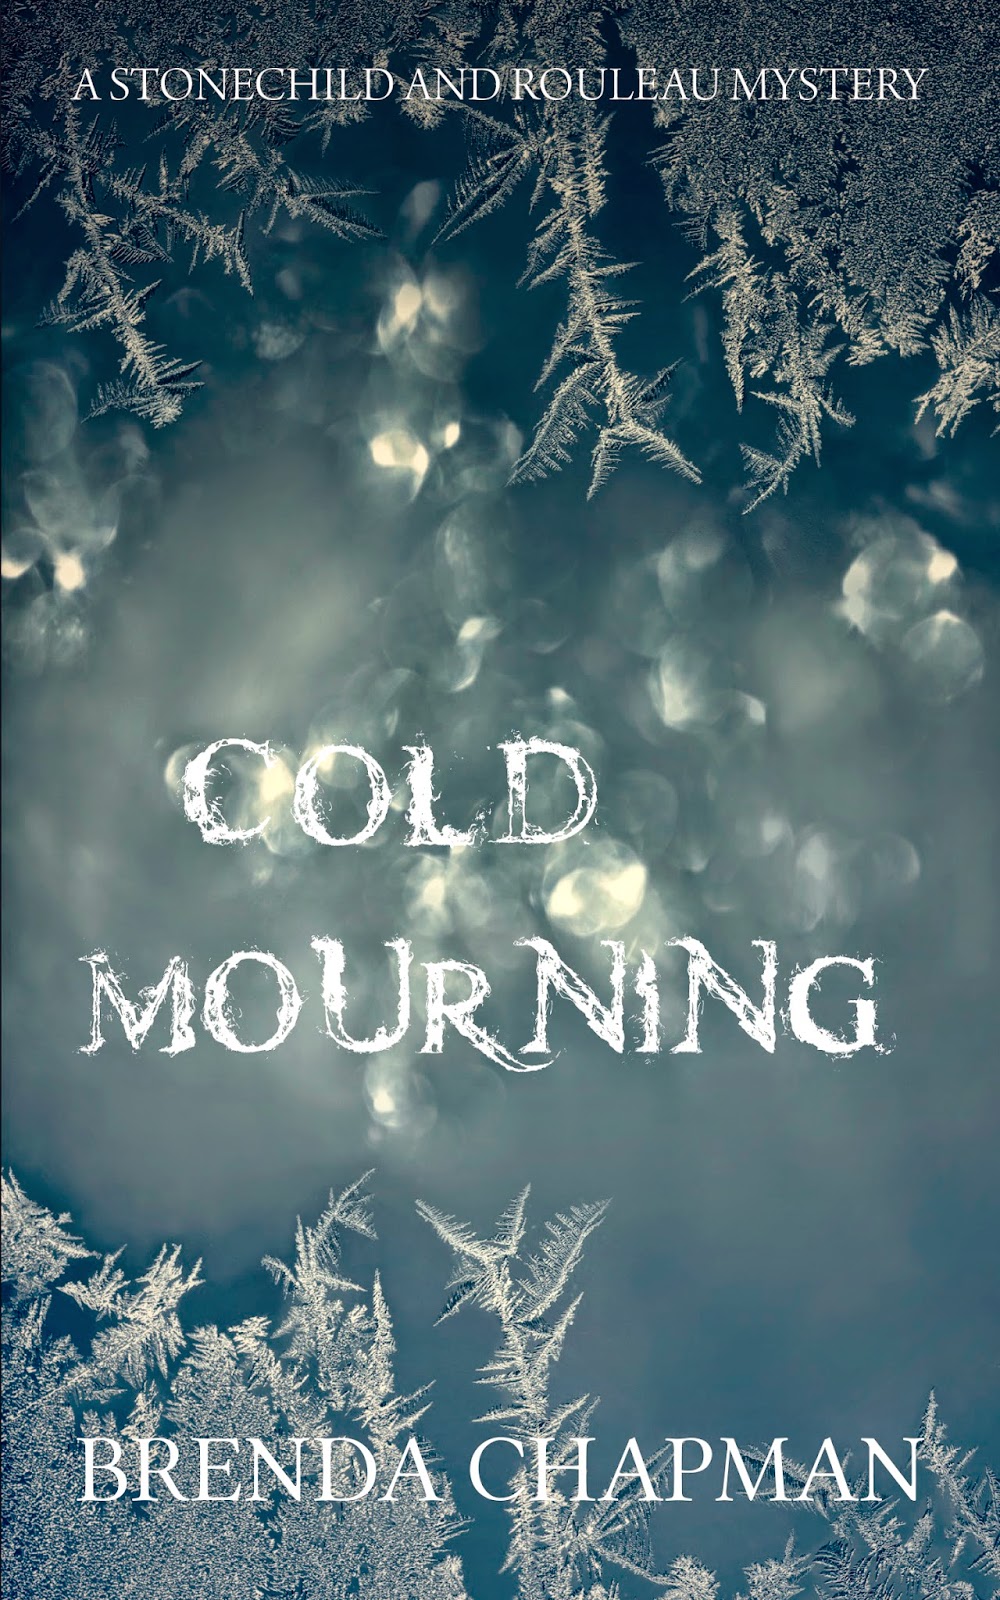 http://discover.halifaxpubliclibraries.ca/?q=title:cold%20mourning